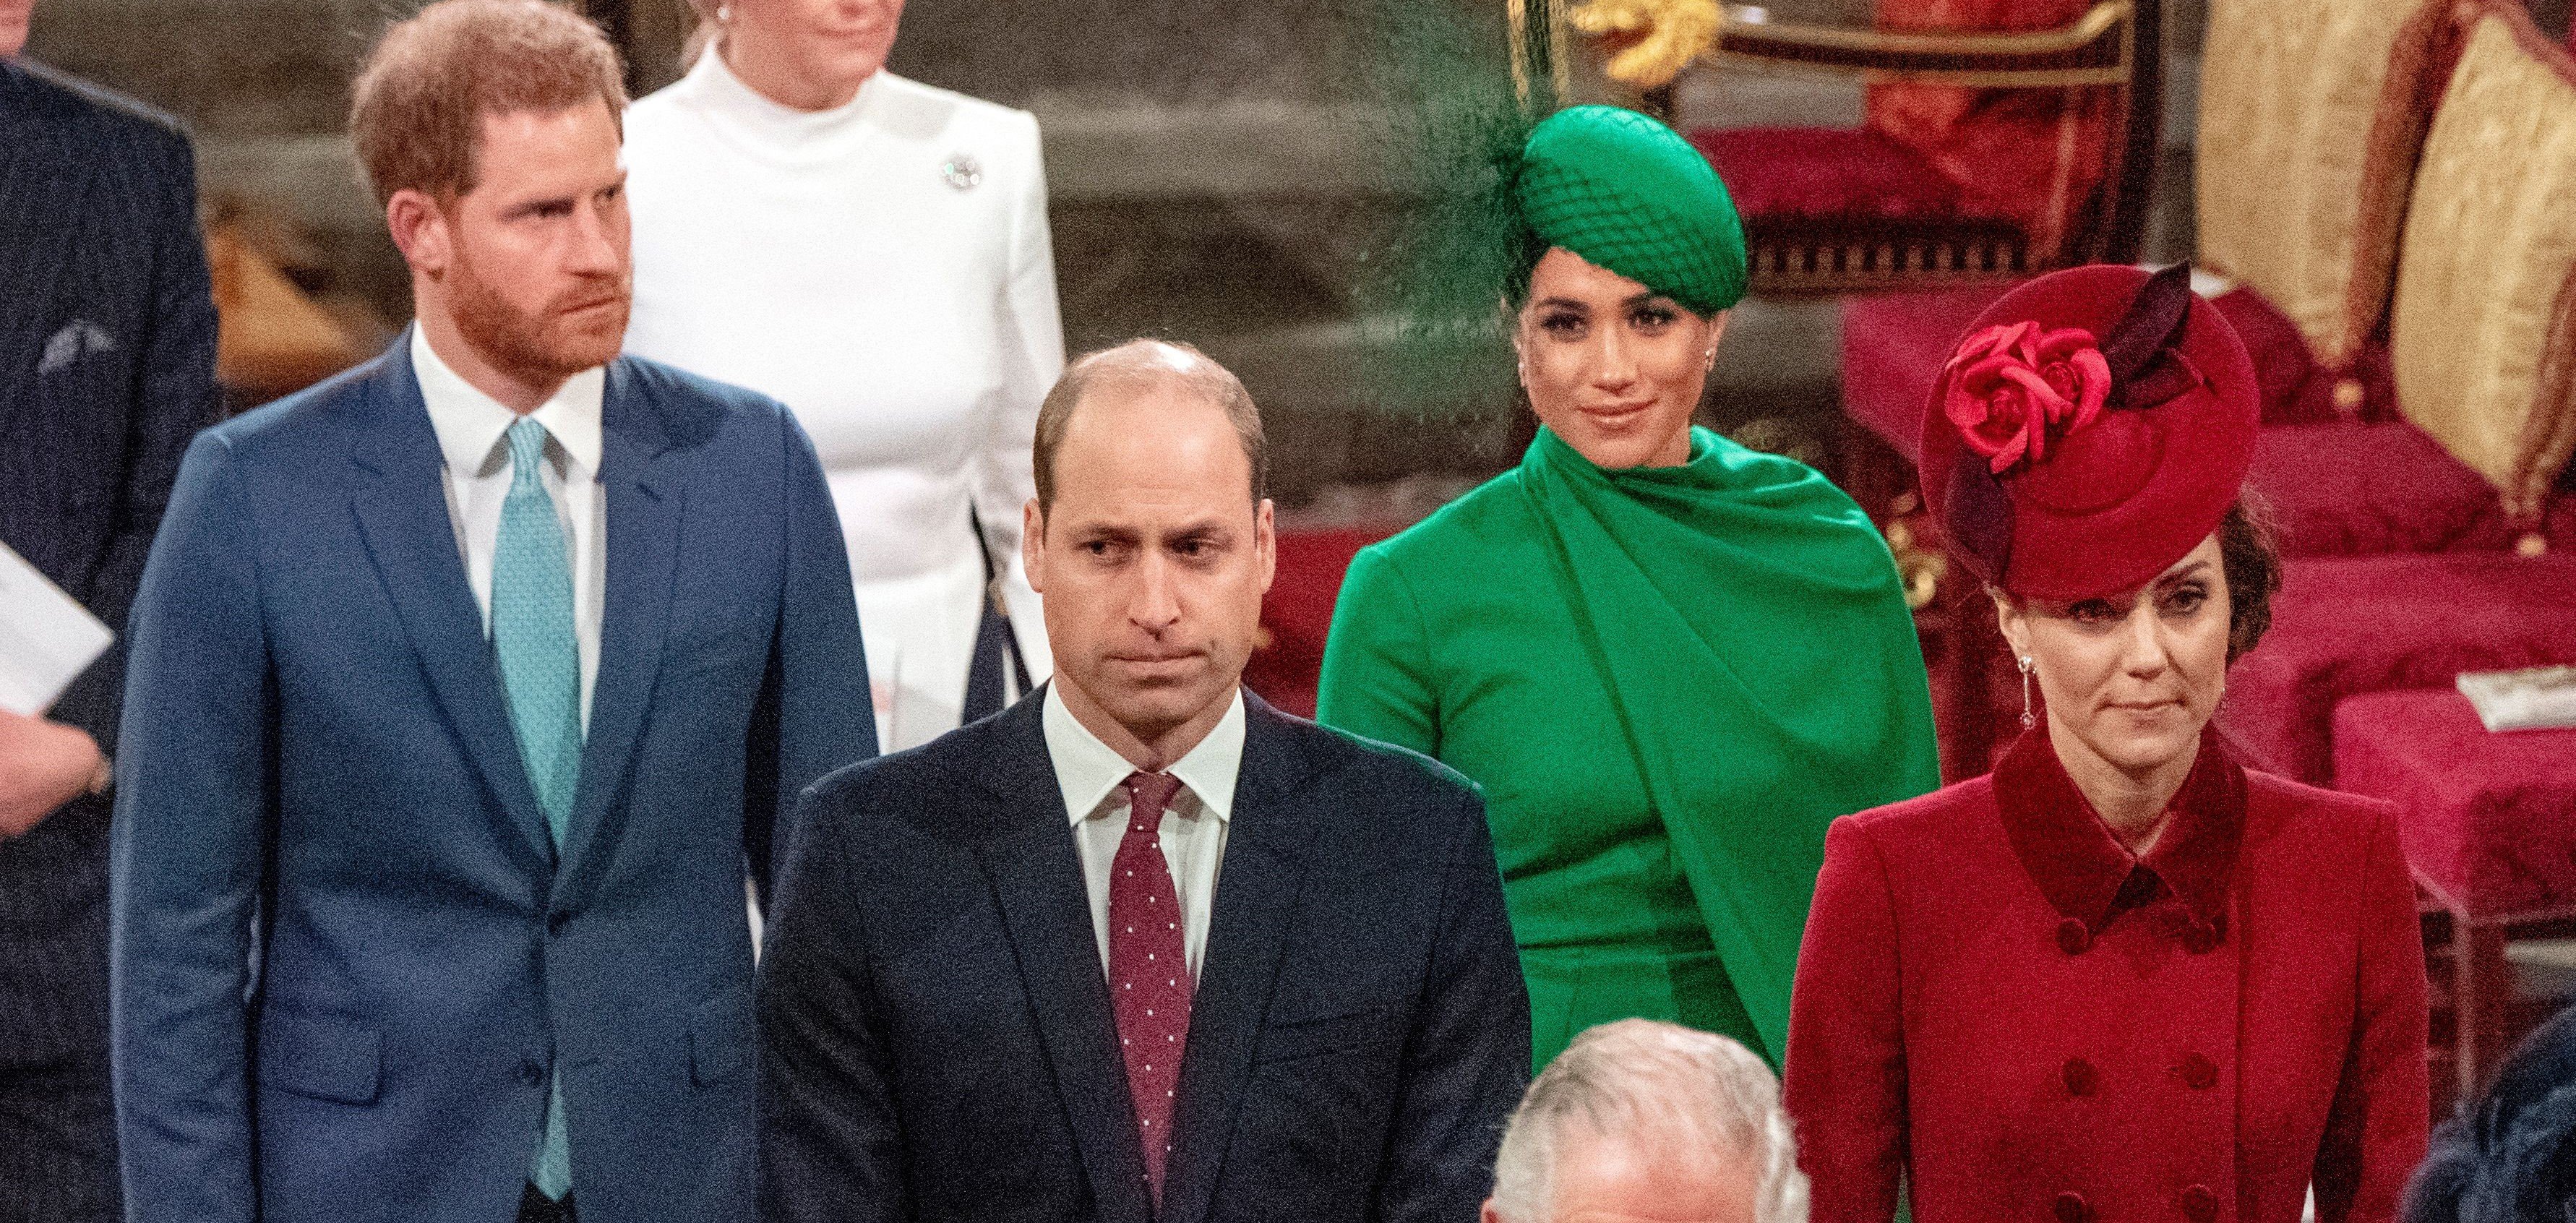 Prince Harry, Meghan Markle, Prince William, and Kate Middleton leave the Commonwealth Service on March 9, 2020